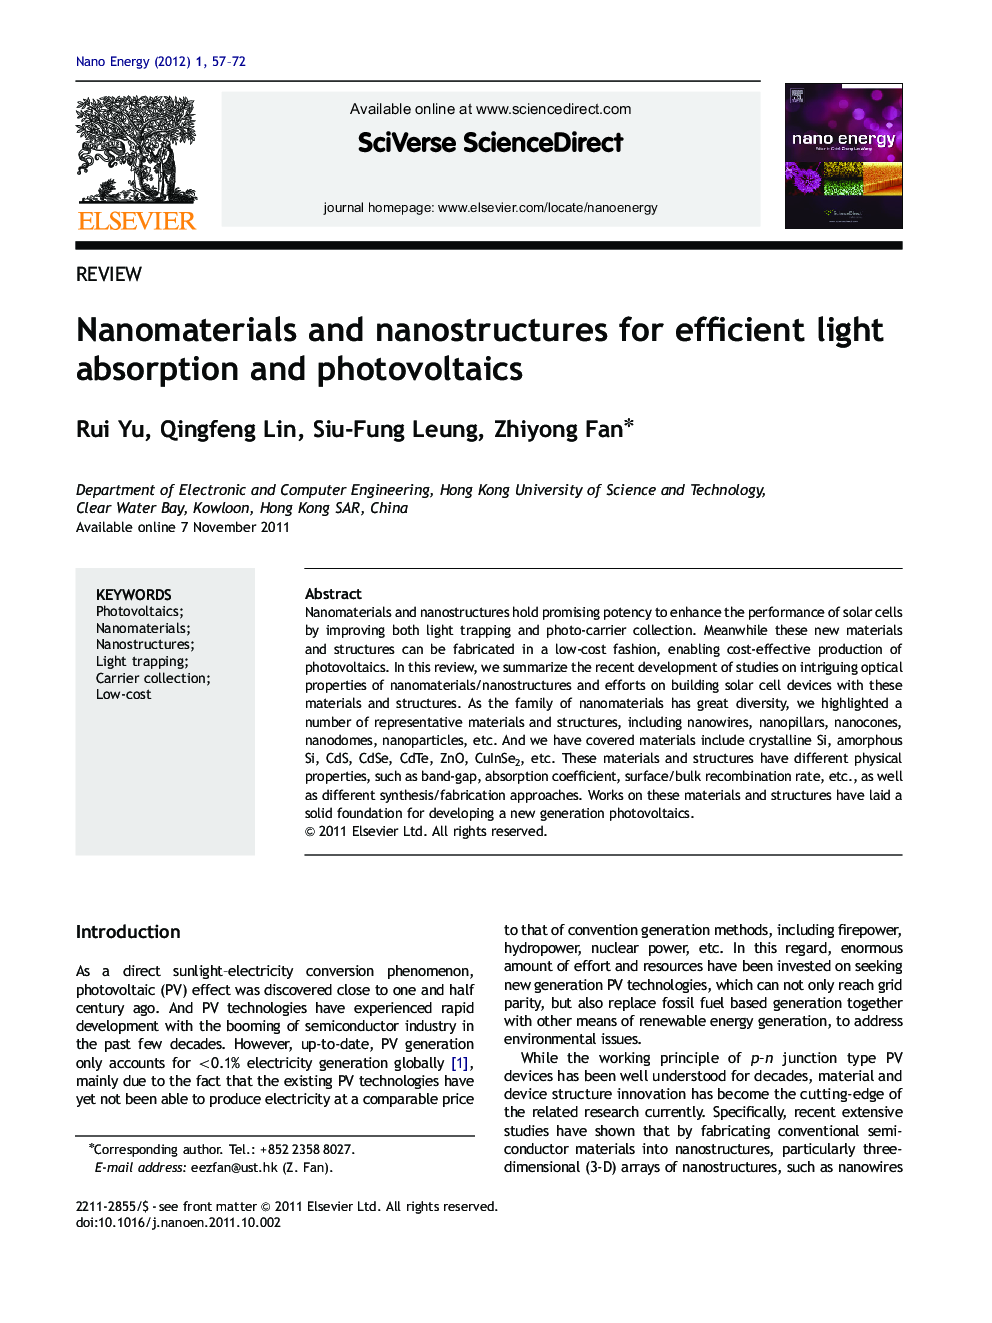 Nanomaterials and nanostructures for efficient light absorption and photovoltaics